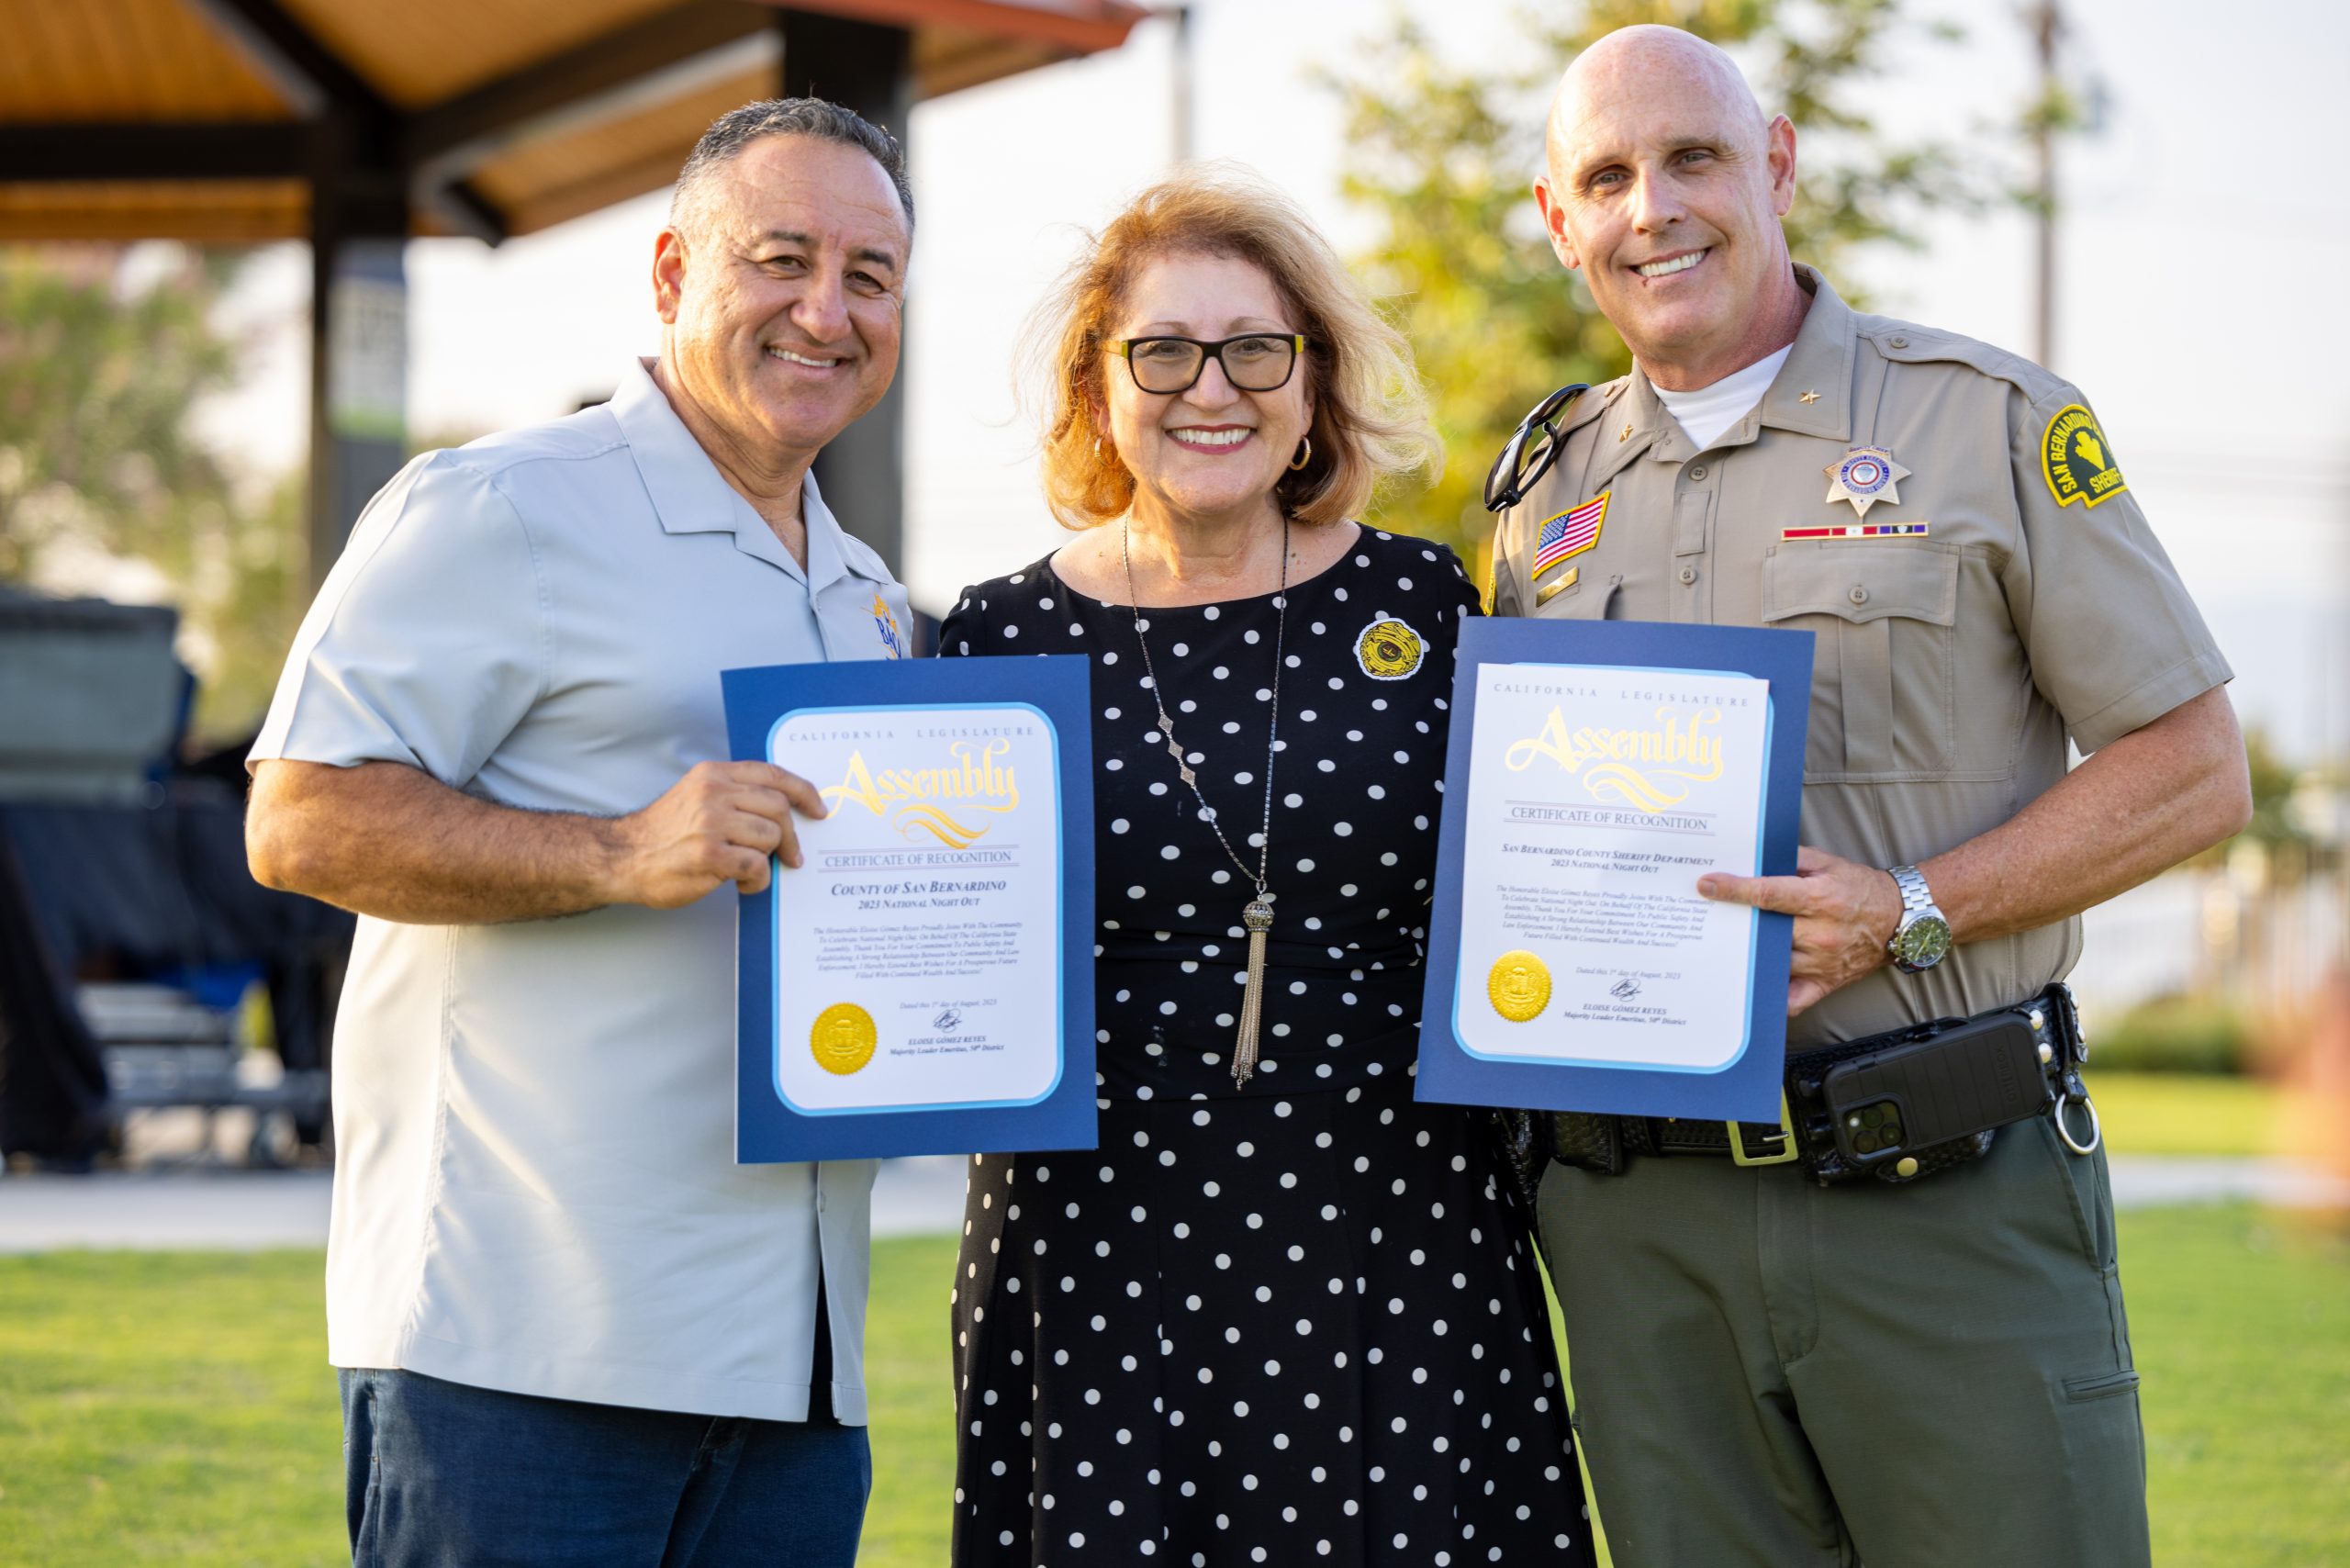 California State Assembly Majority Leader Emeritus Elóise Gomez Reyes (center) presents, San Bernardino County Fifth District Supervisor Joe Baca, Jr. (left) and County Sheriff-Coroner Shannon D. Dicus (right) with Certificates of Recognition at the National Night Out event, Tuesday, Aug. 1, 2023, at Ayala Park in Bloomington.